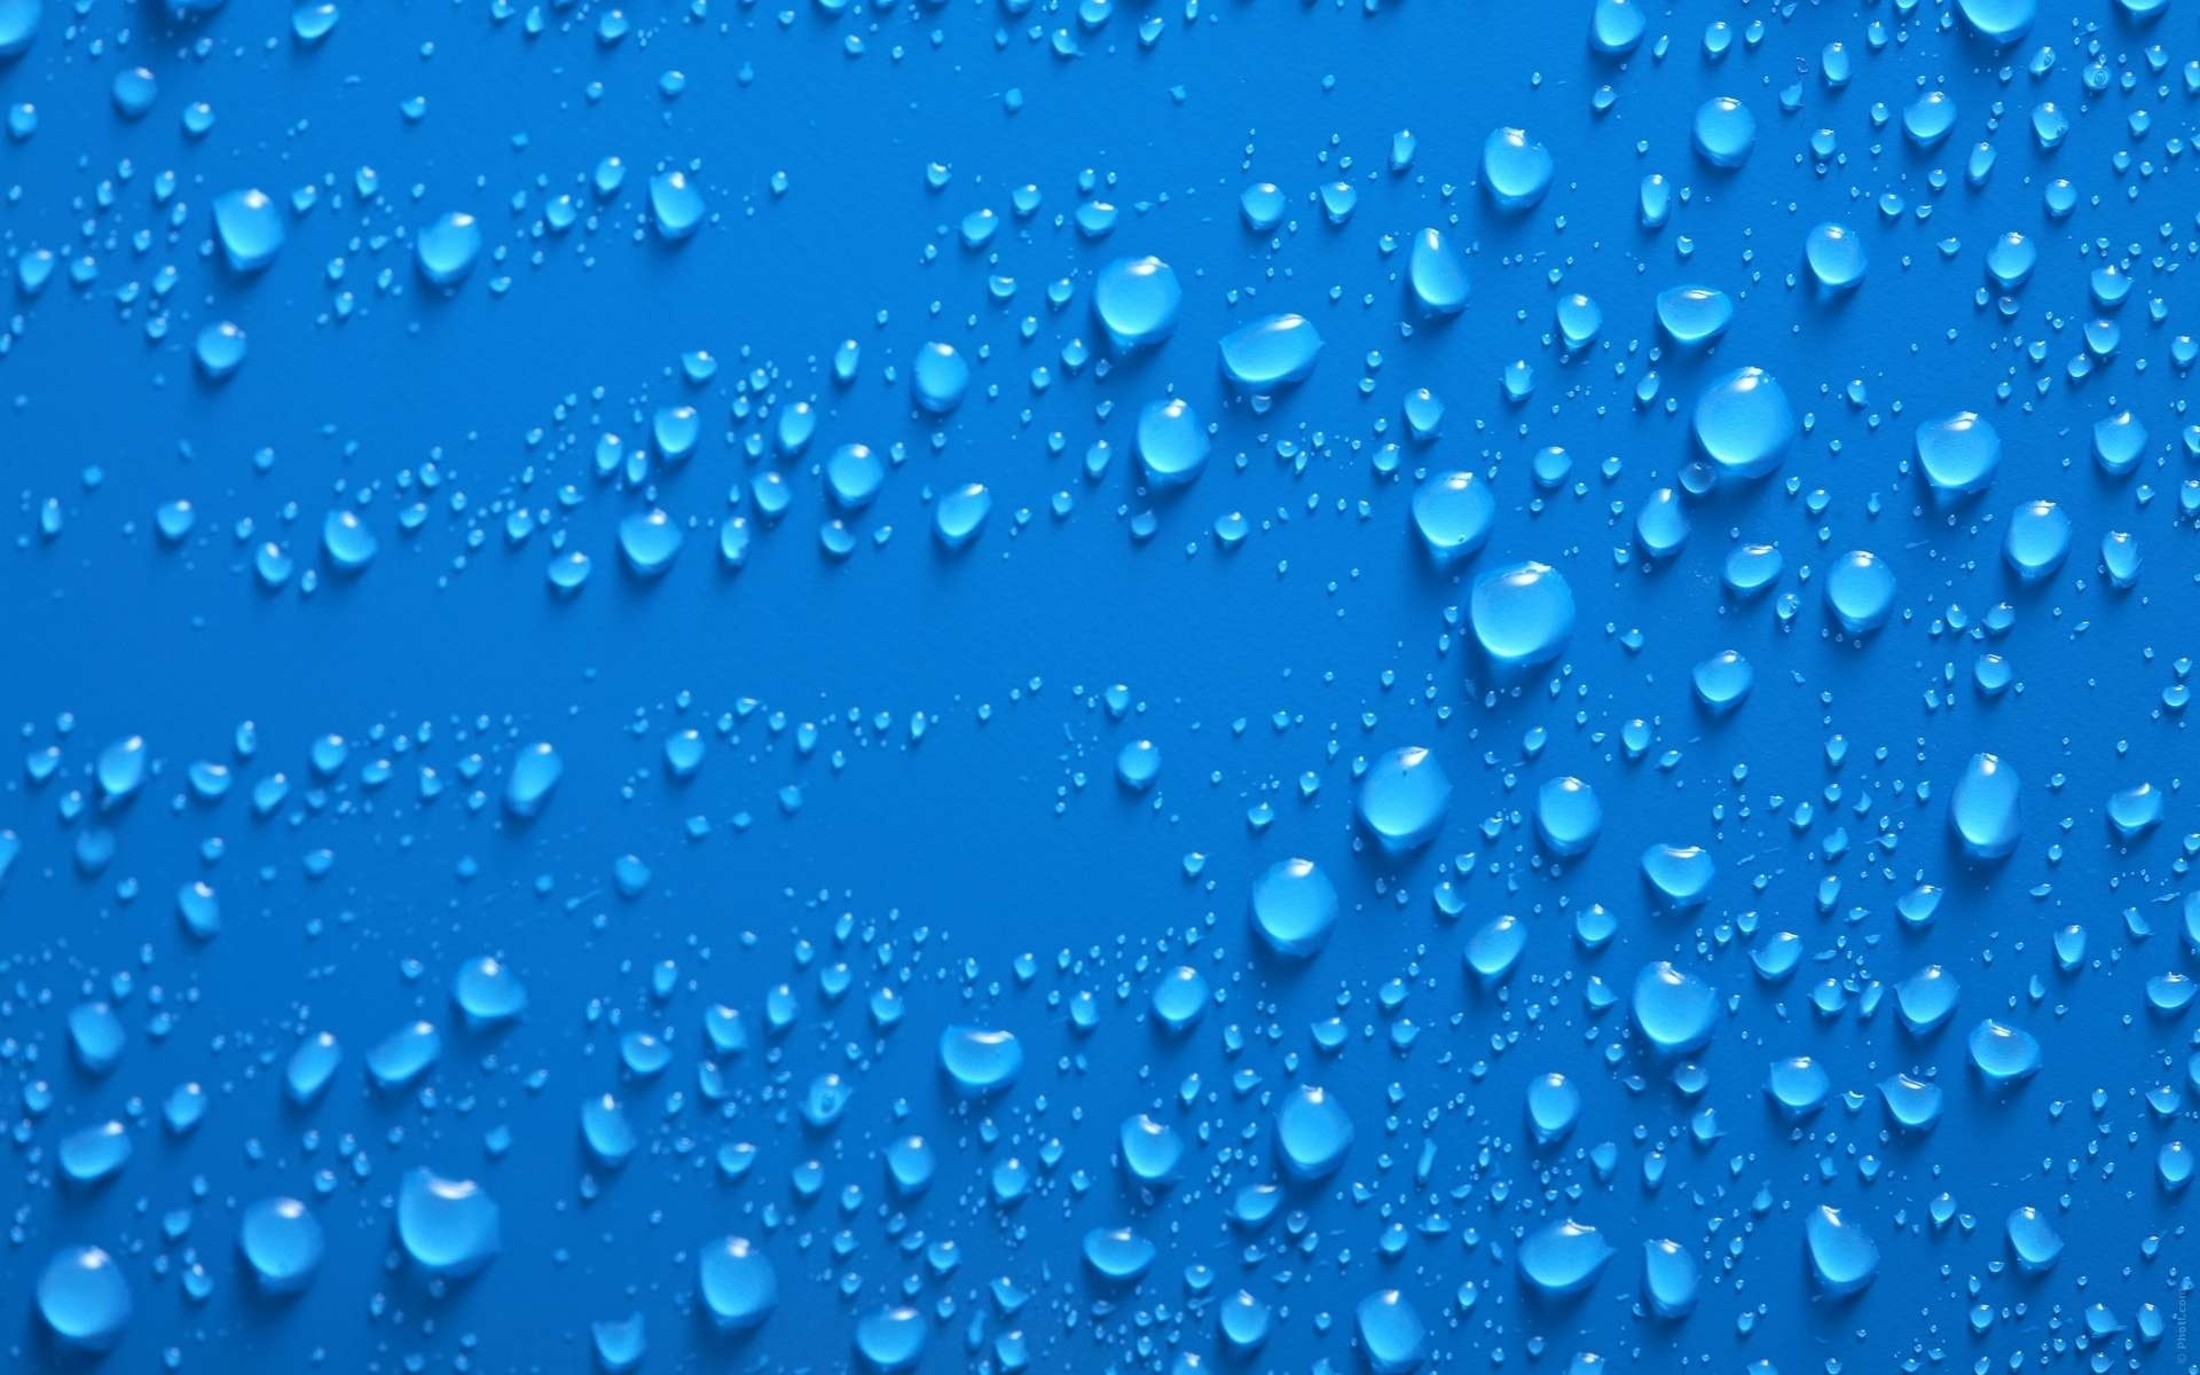 General 2200x1375 liquid texture water drops blue background simple background closeup